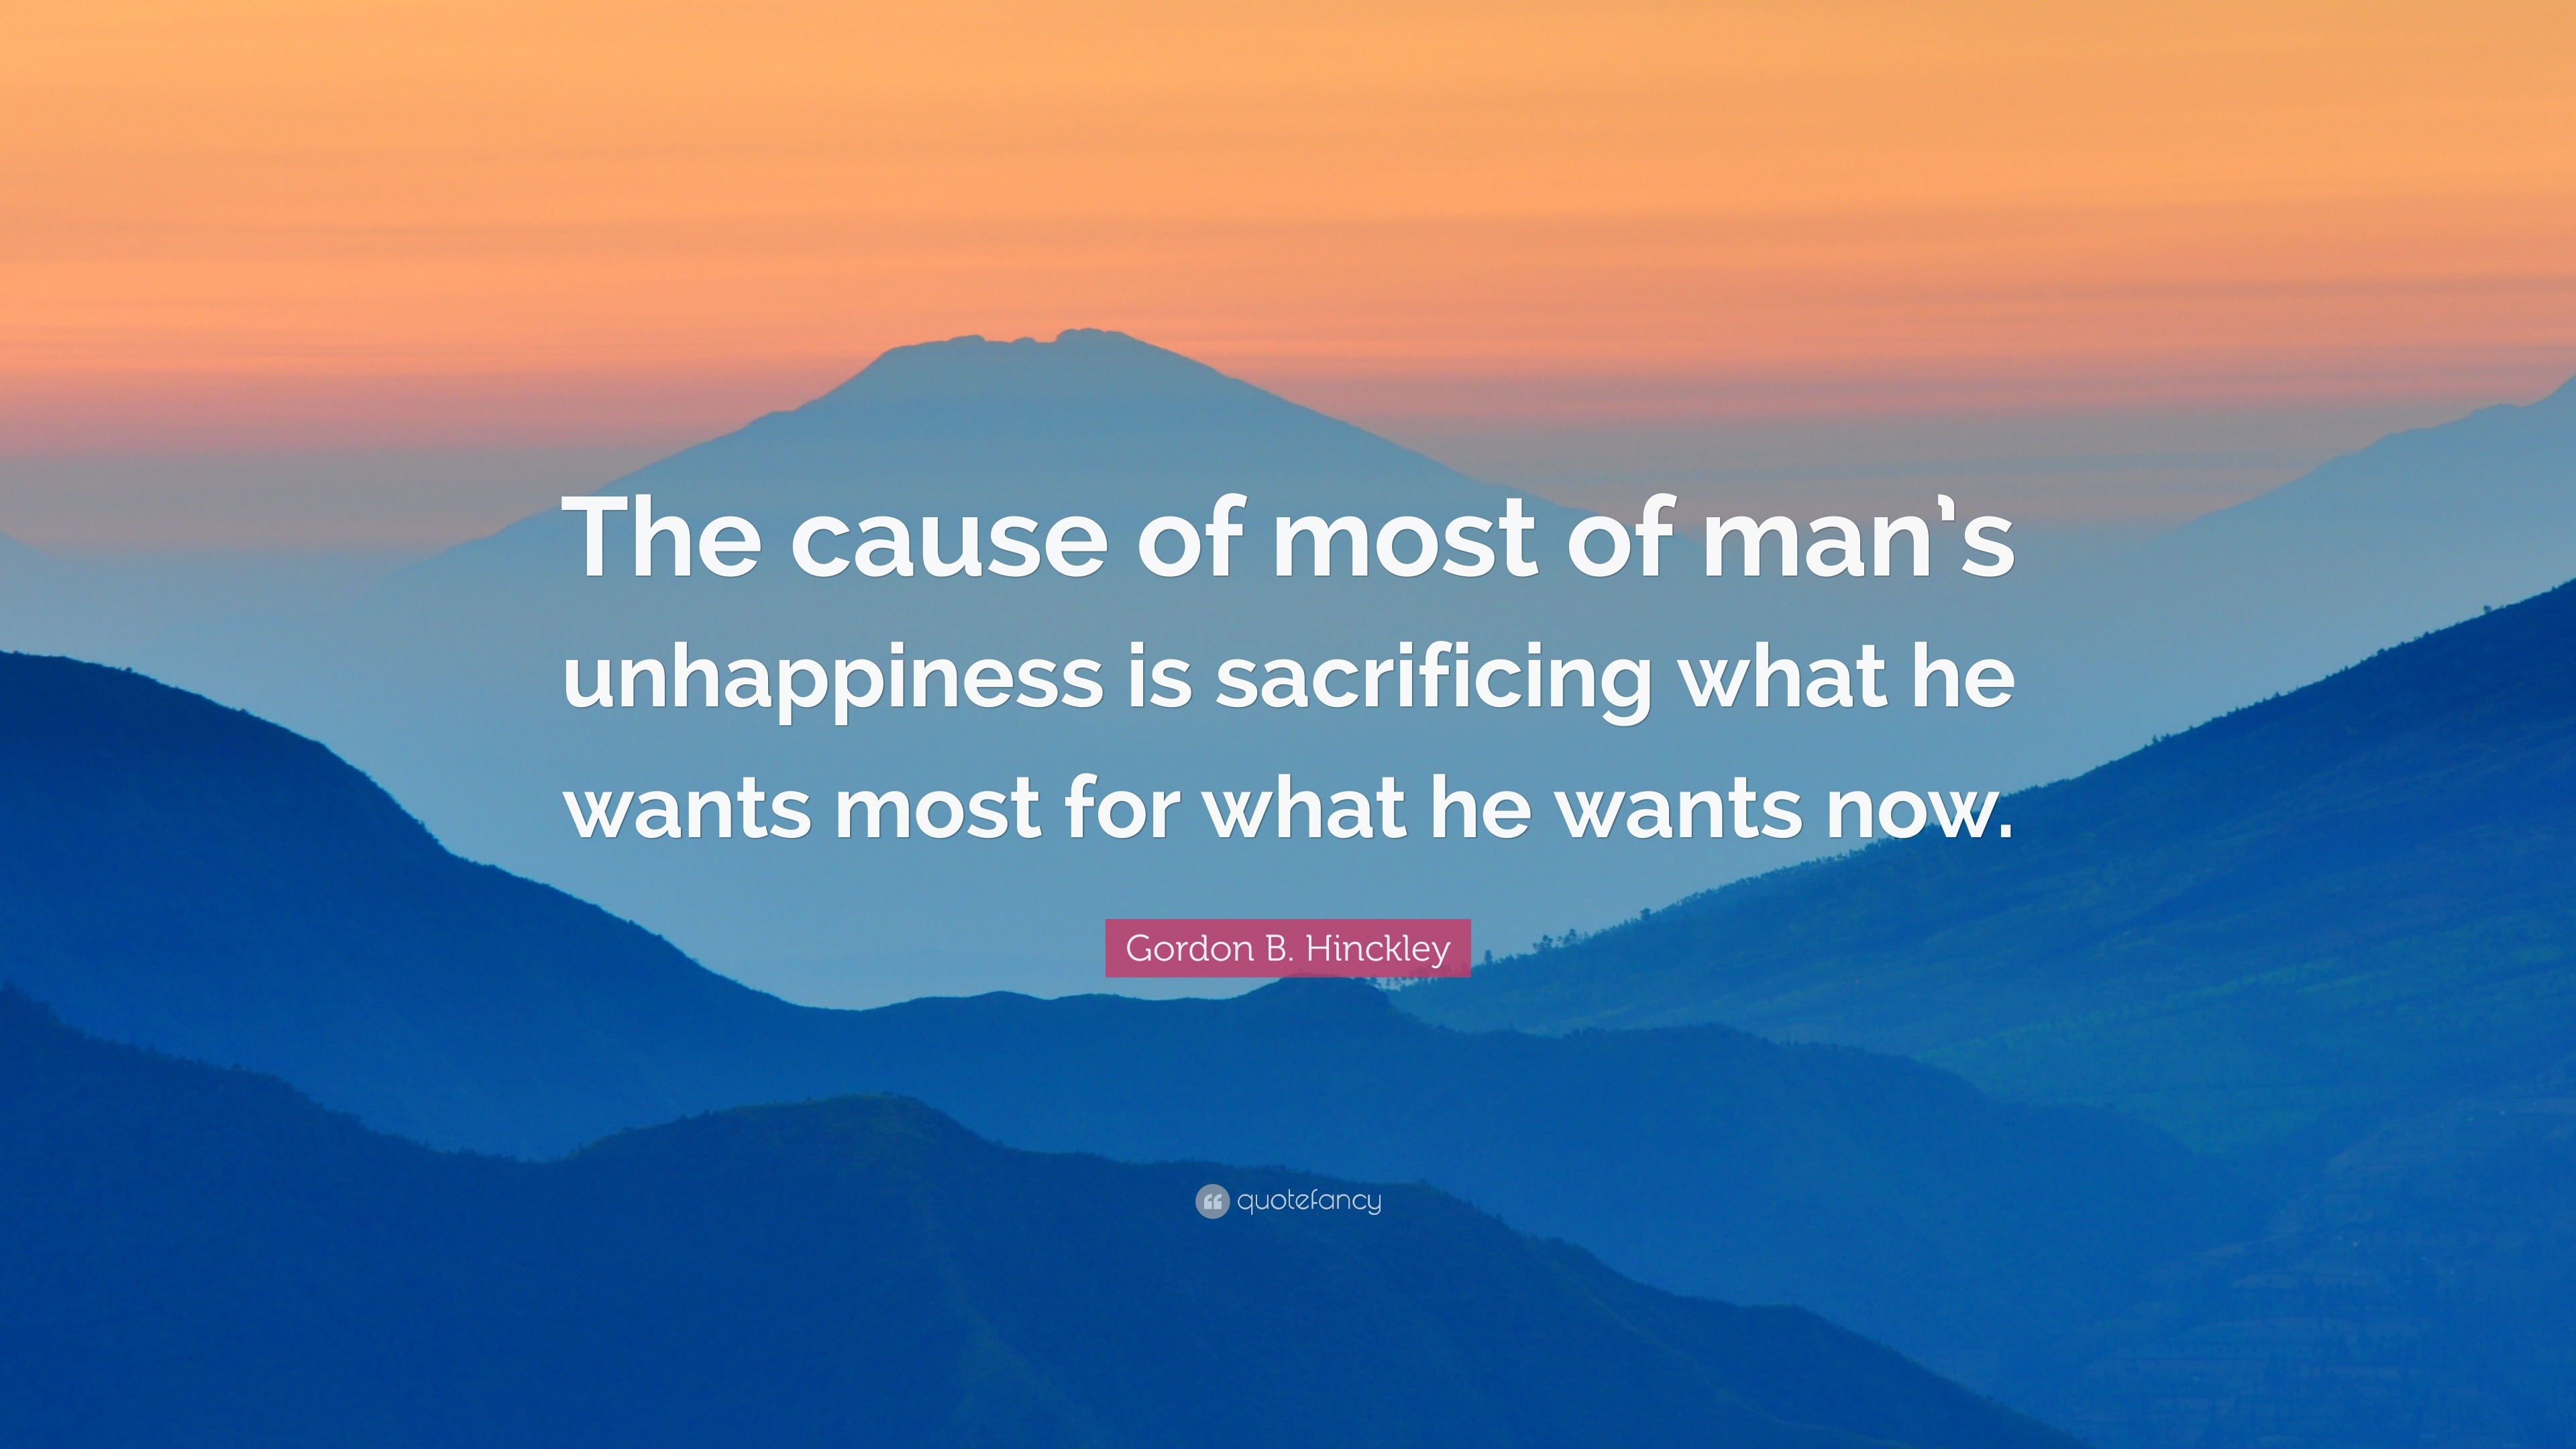 Gordon B Hinckley Quote “The cause of most of man s unhappiness is sacrificing